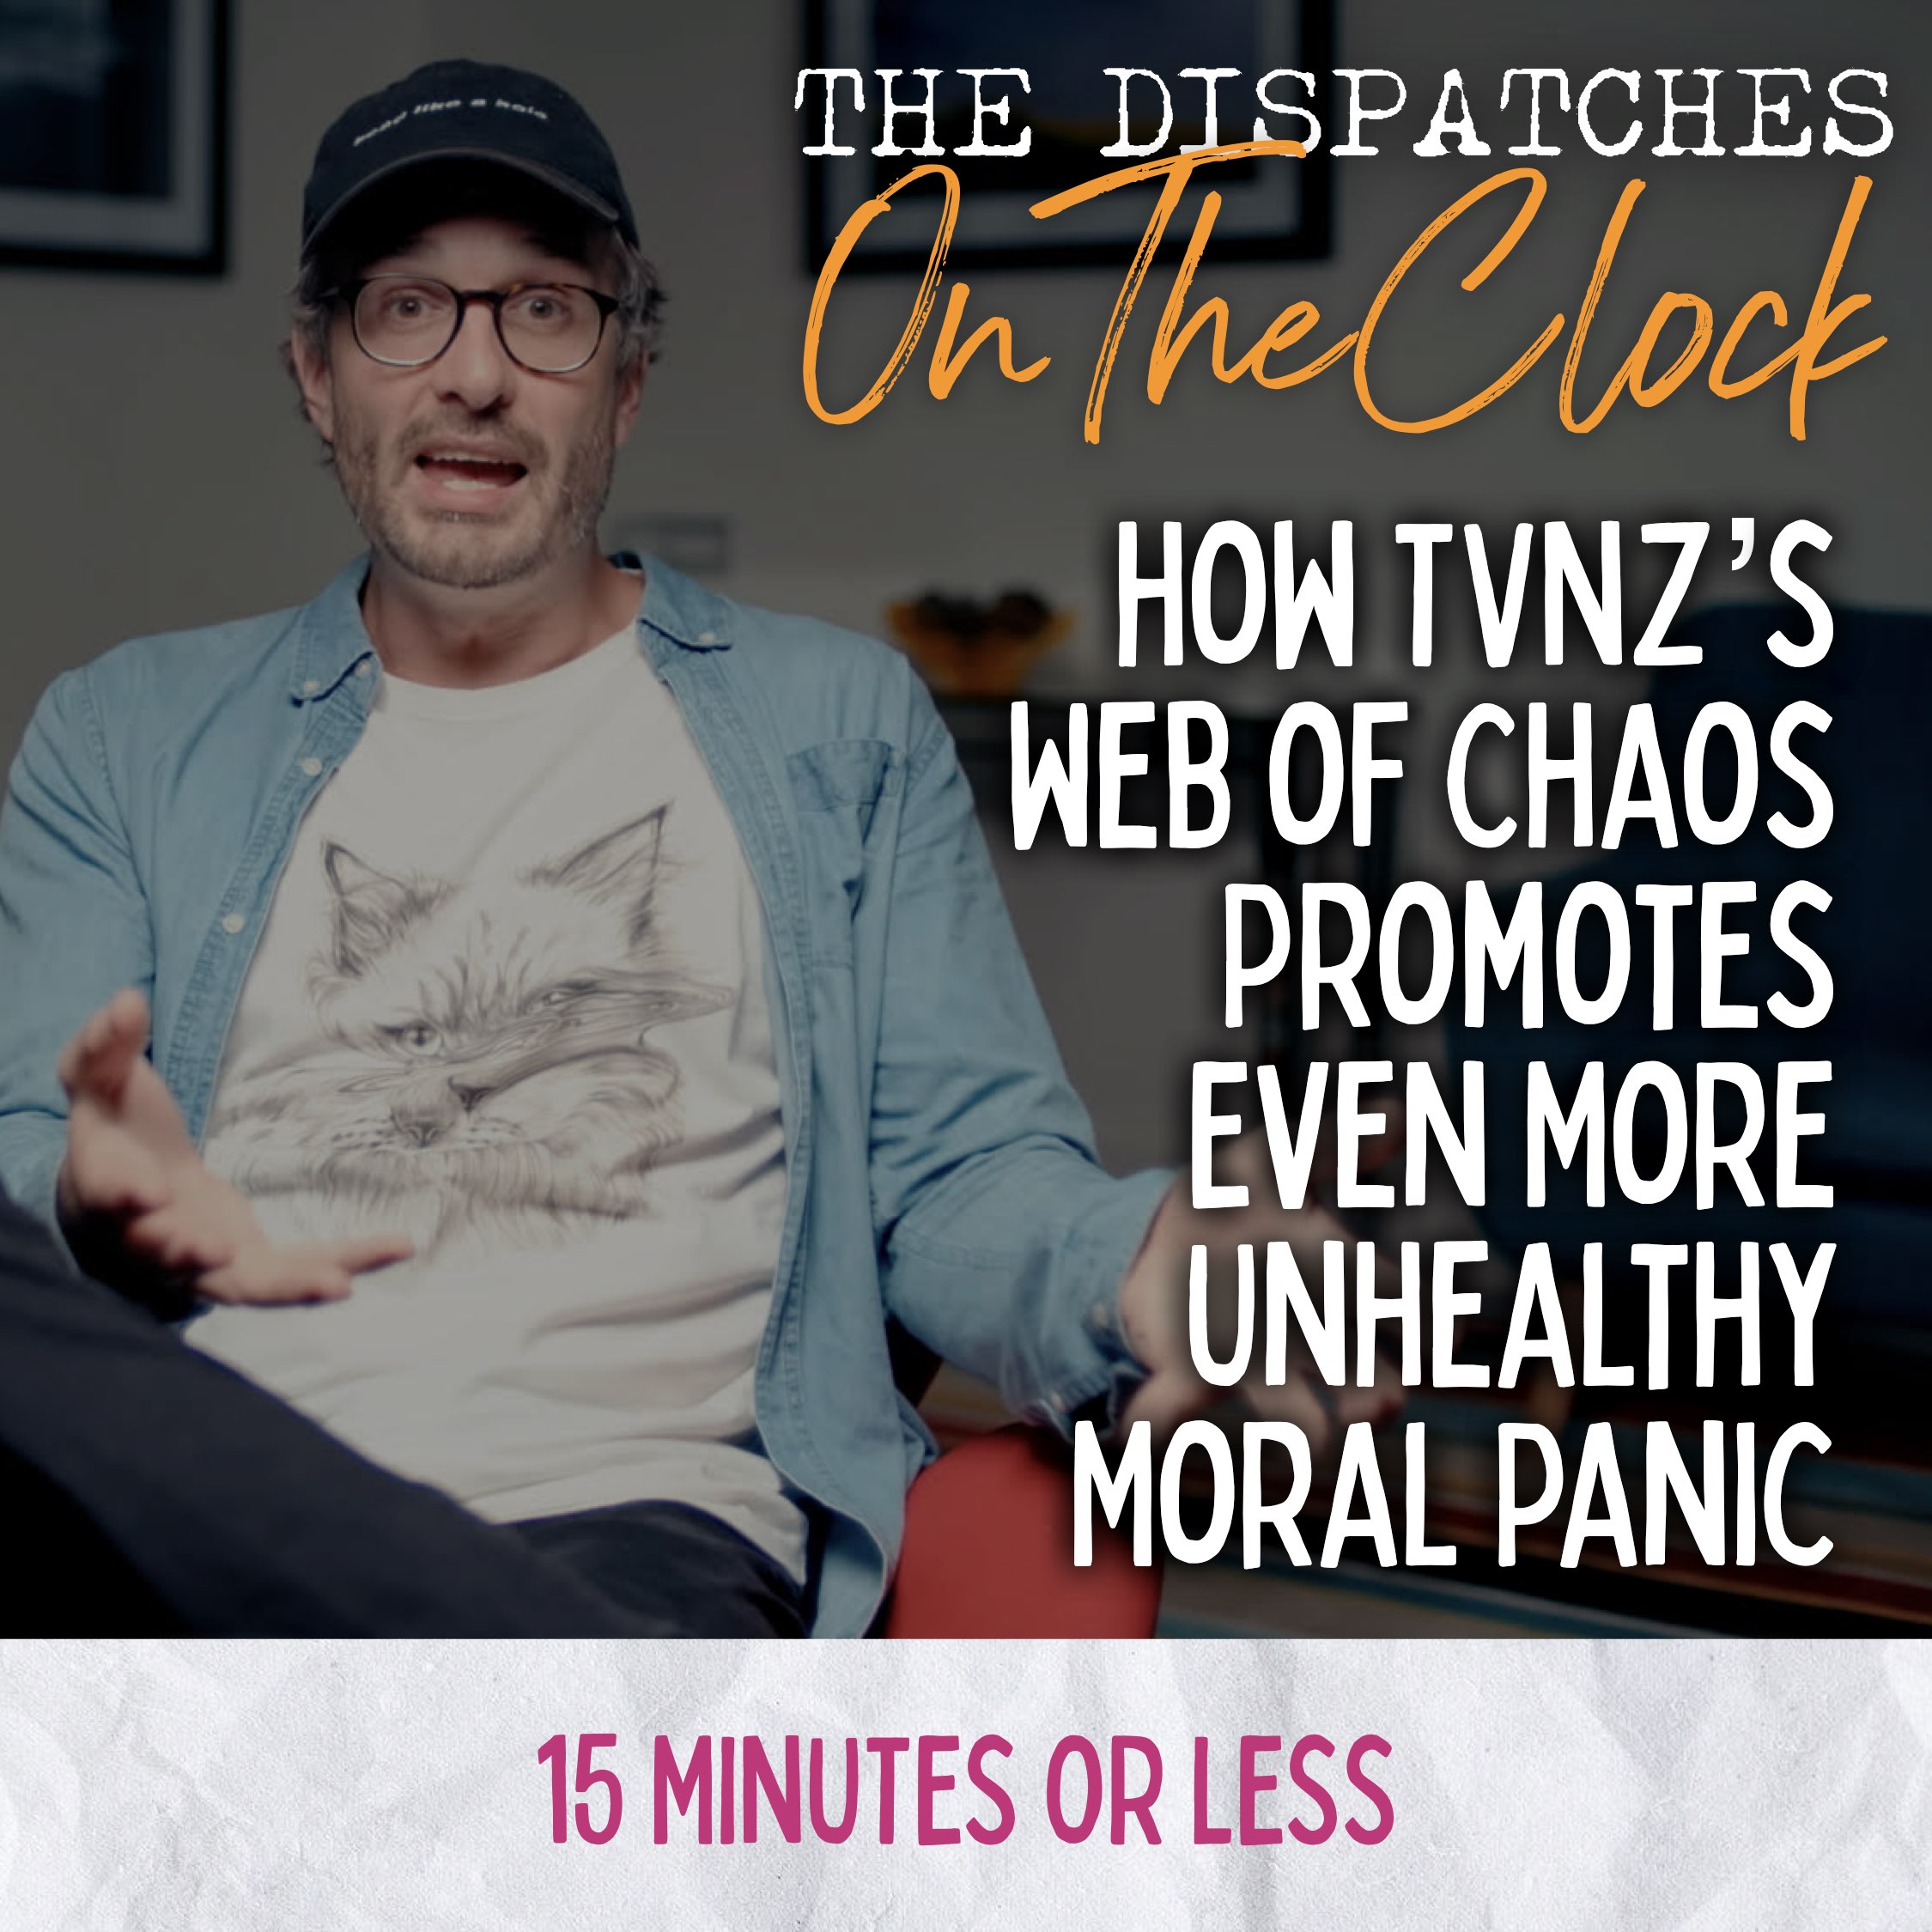 ON THE CLOCK | Web of Chaos Promotes Even More Unhealthy Moral Panic